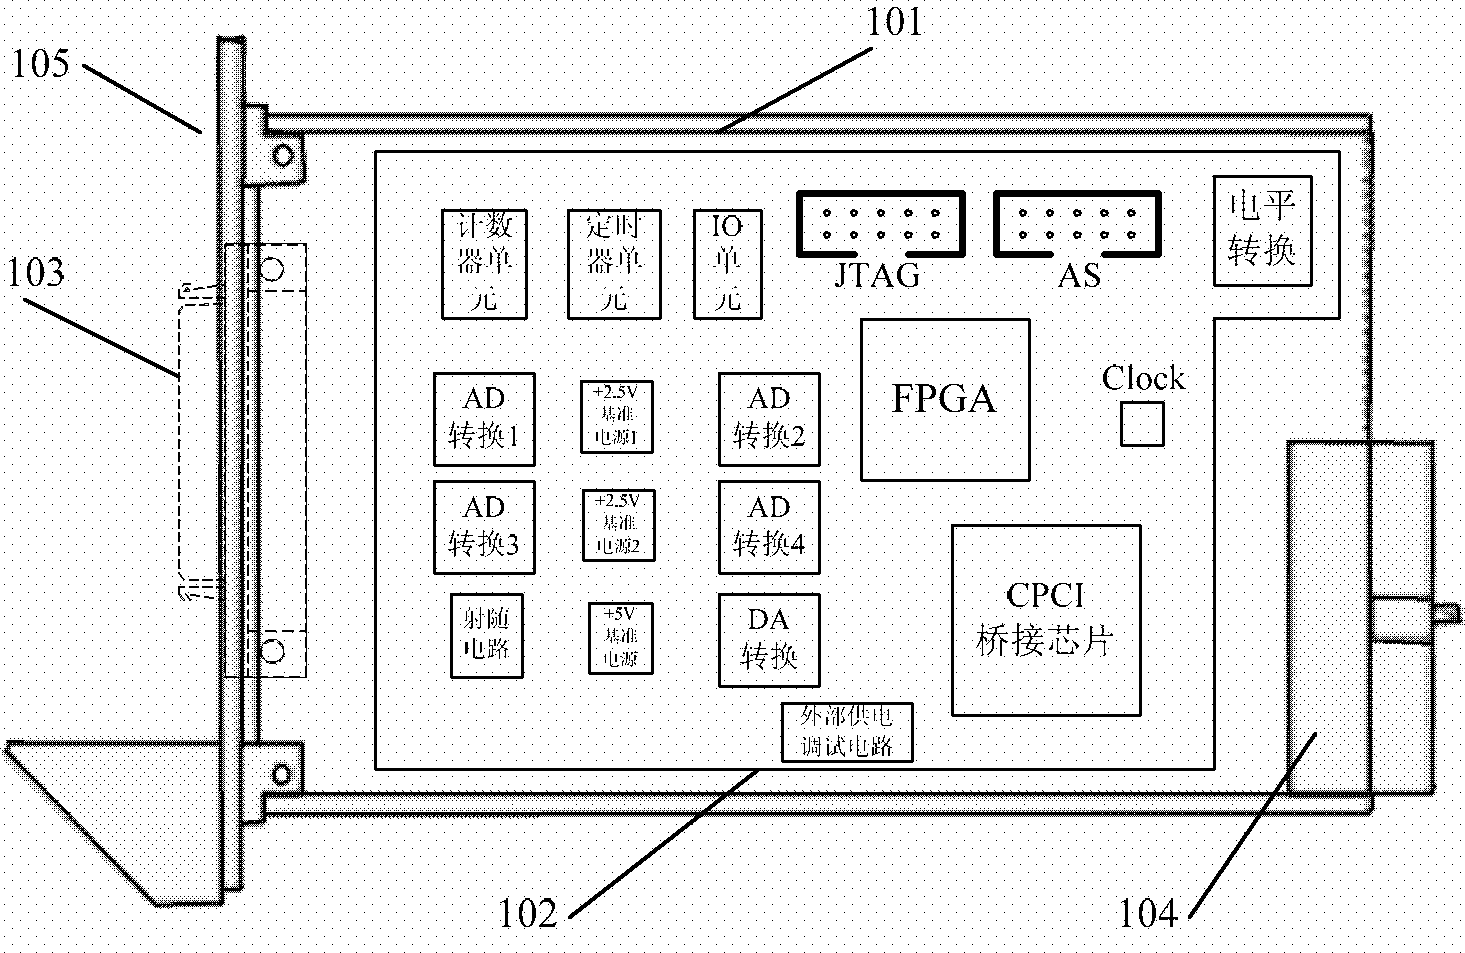 Multifunctional data acquisition module based on compact peripheral component interconnect (CPCI) bus